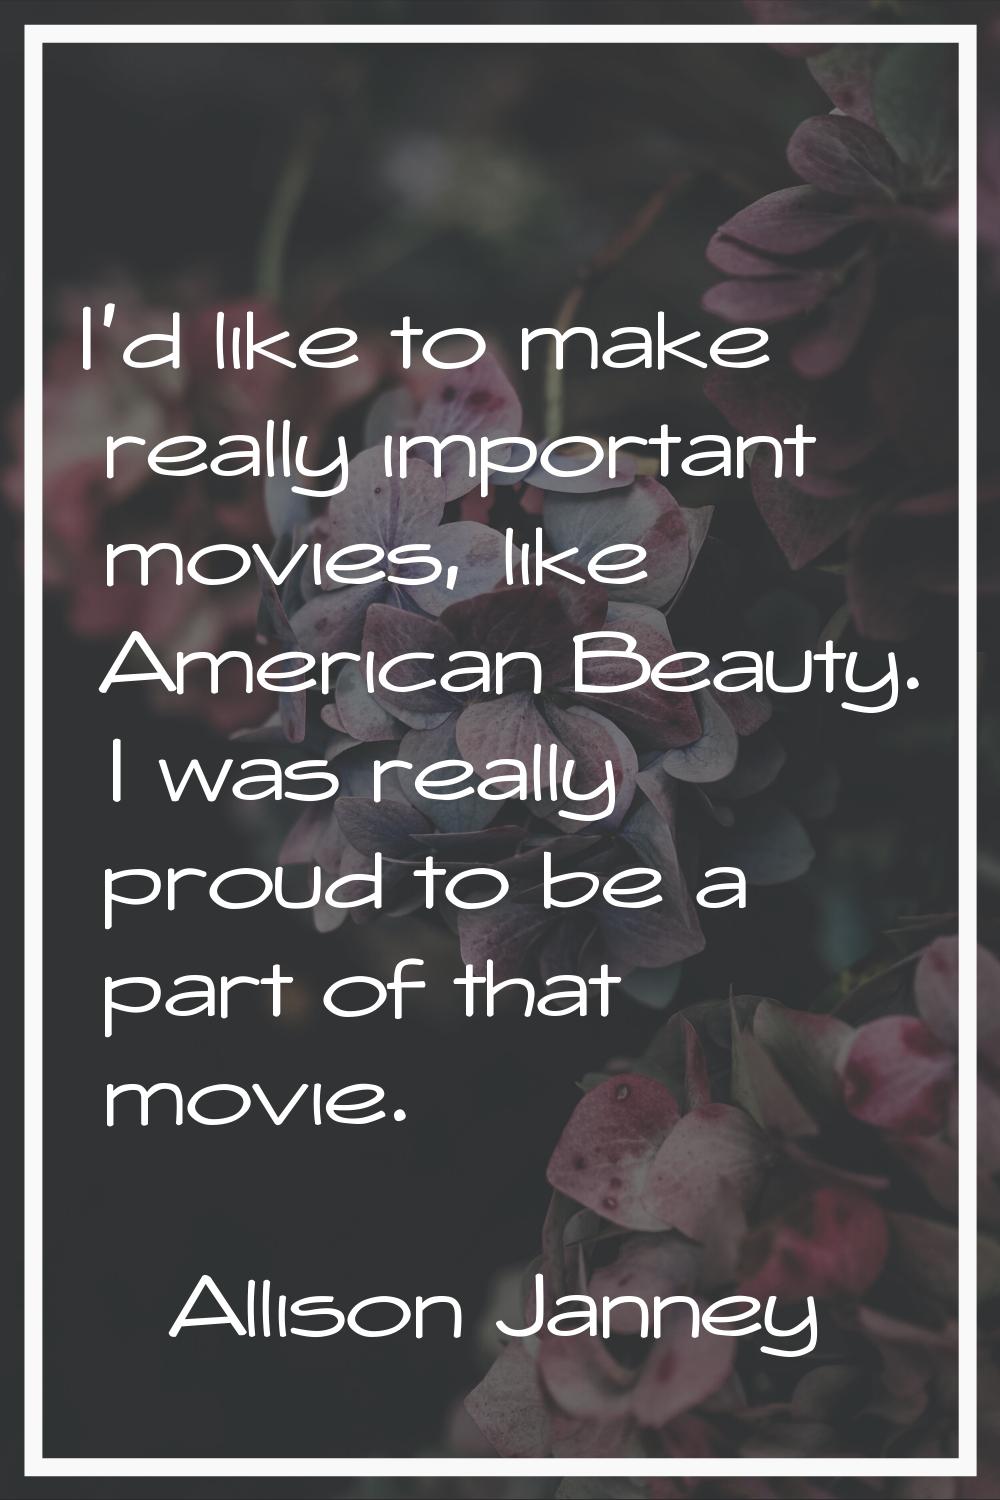 I'd like to make really important movies, like American Beauty. I was really proud to be a part of 